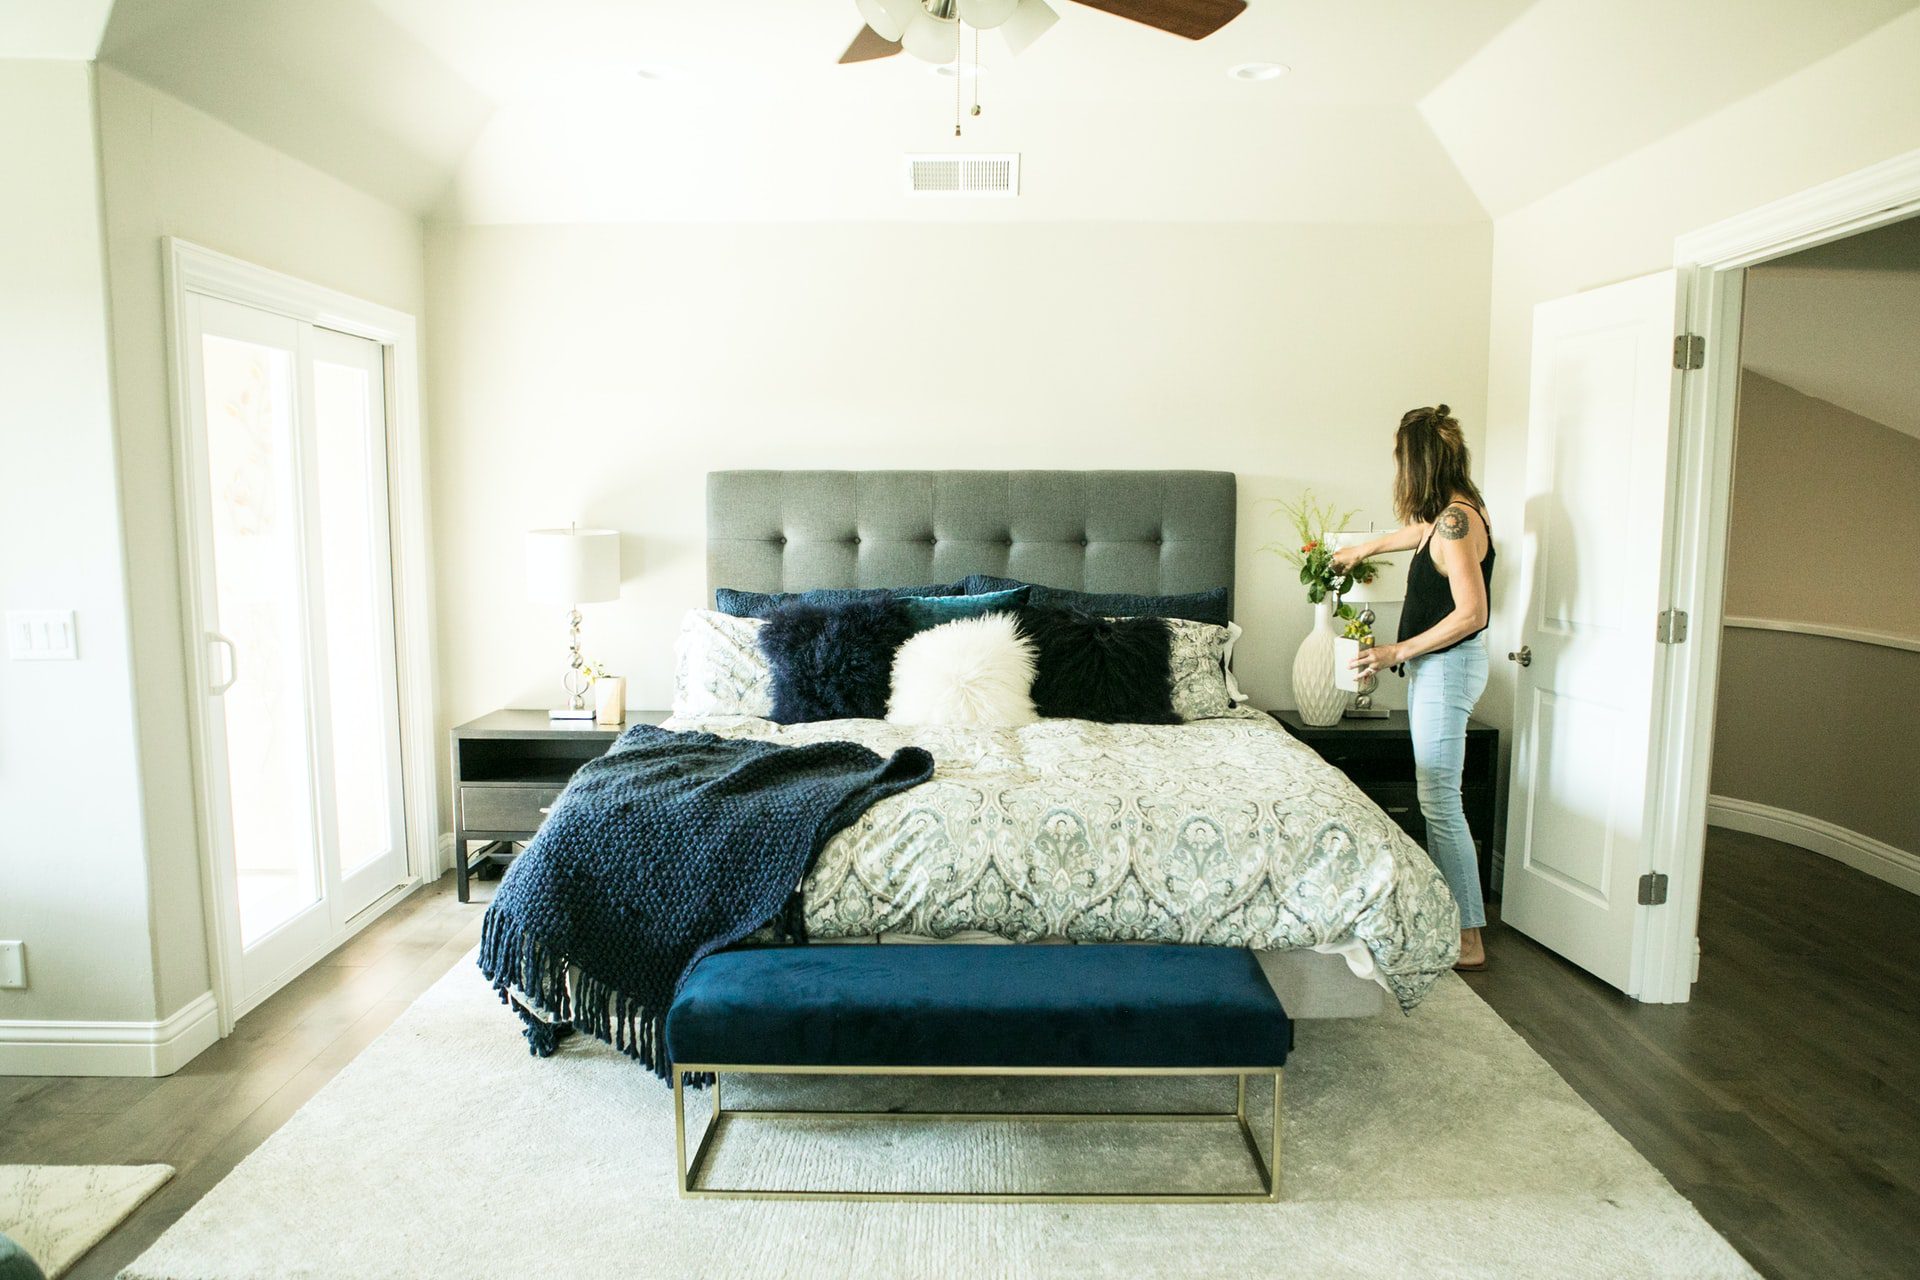 How To Decorate Your Home According to Zodiac Sign